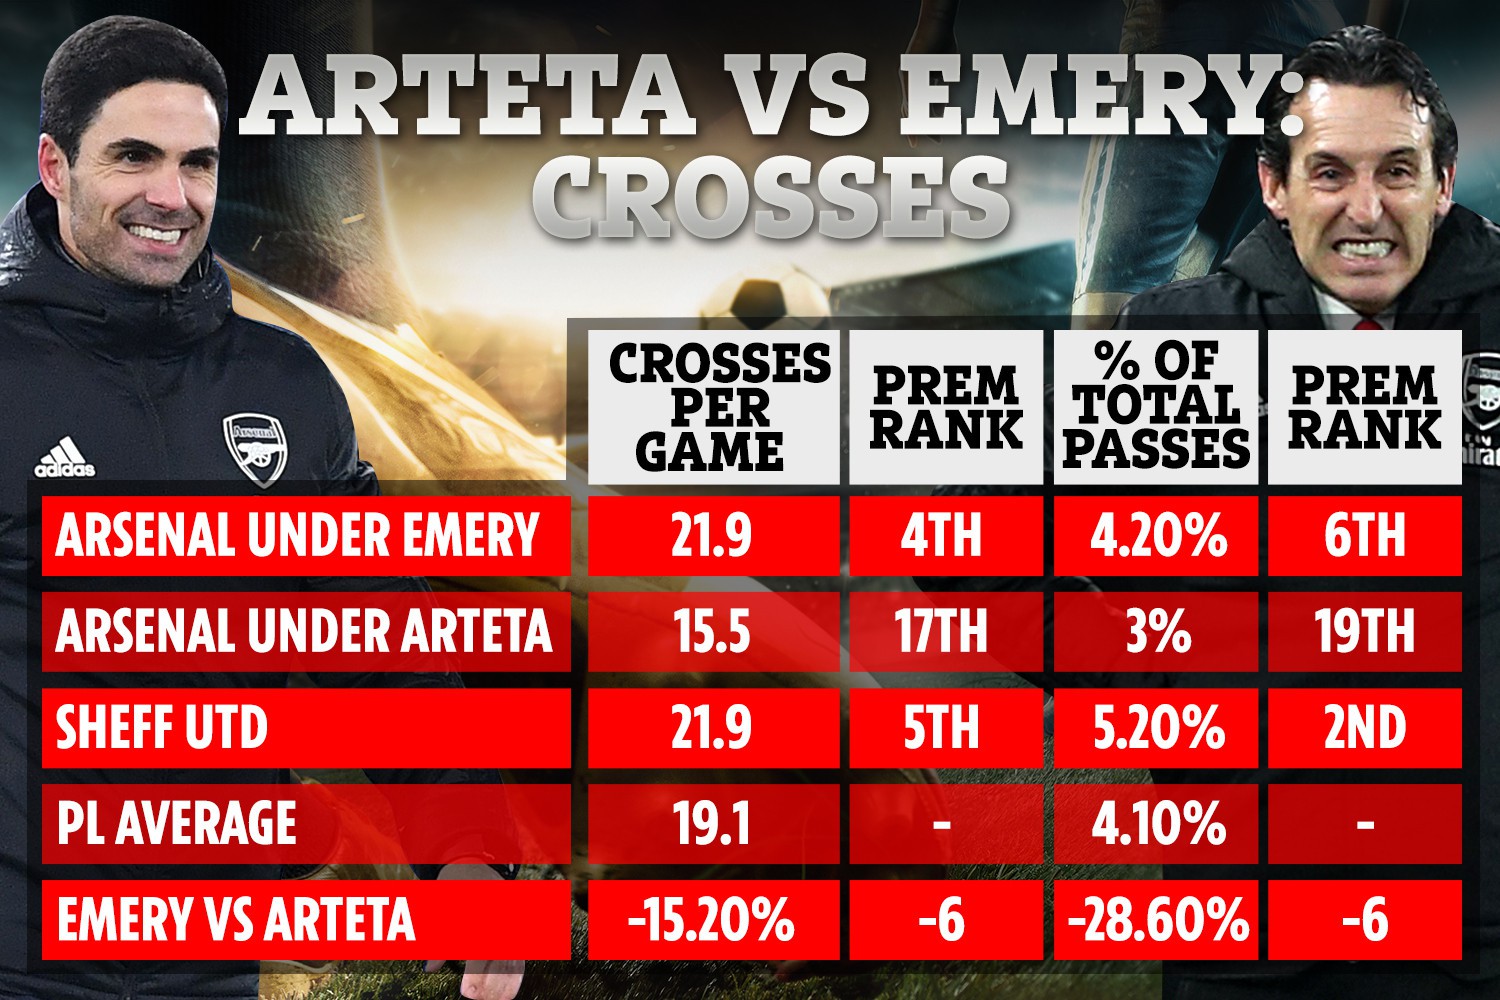 , Arsenal have more backbone since Emery  but Arteta has them playing fewer through balls, crosses and taking less shots